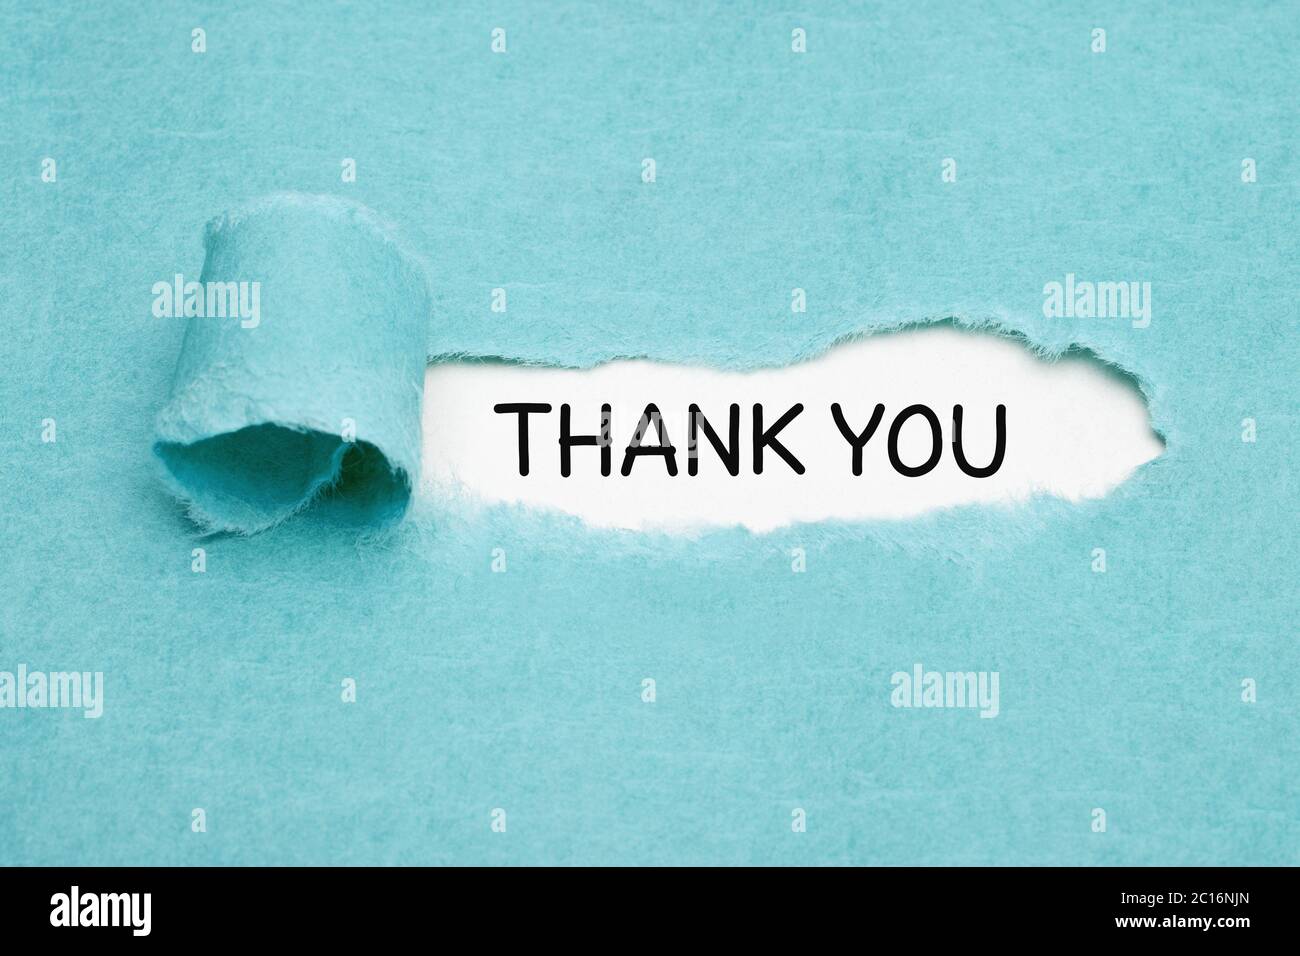 Handwritten text Thank You appearing behind ripped blue paper. Appreciation, gratefulness, or thankfulness concept. Stock Photo